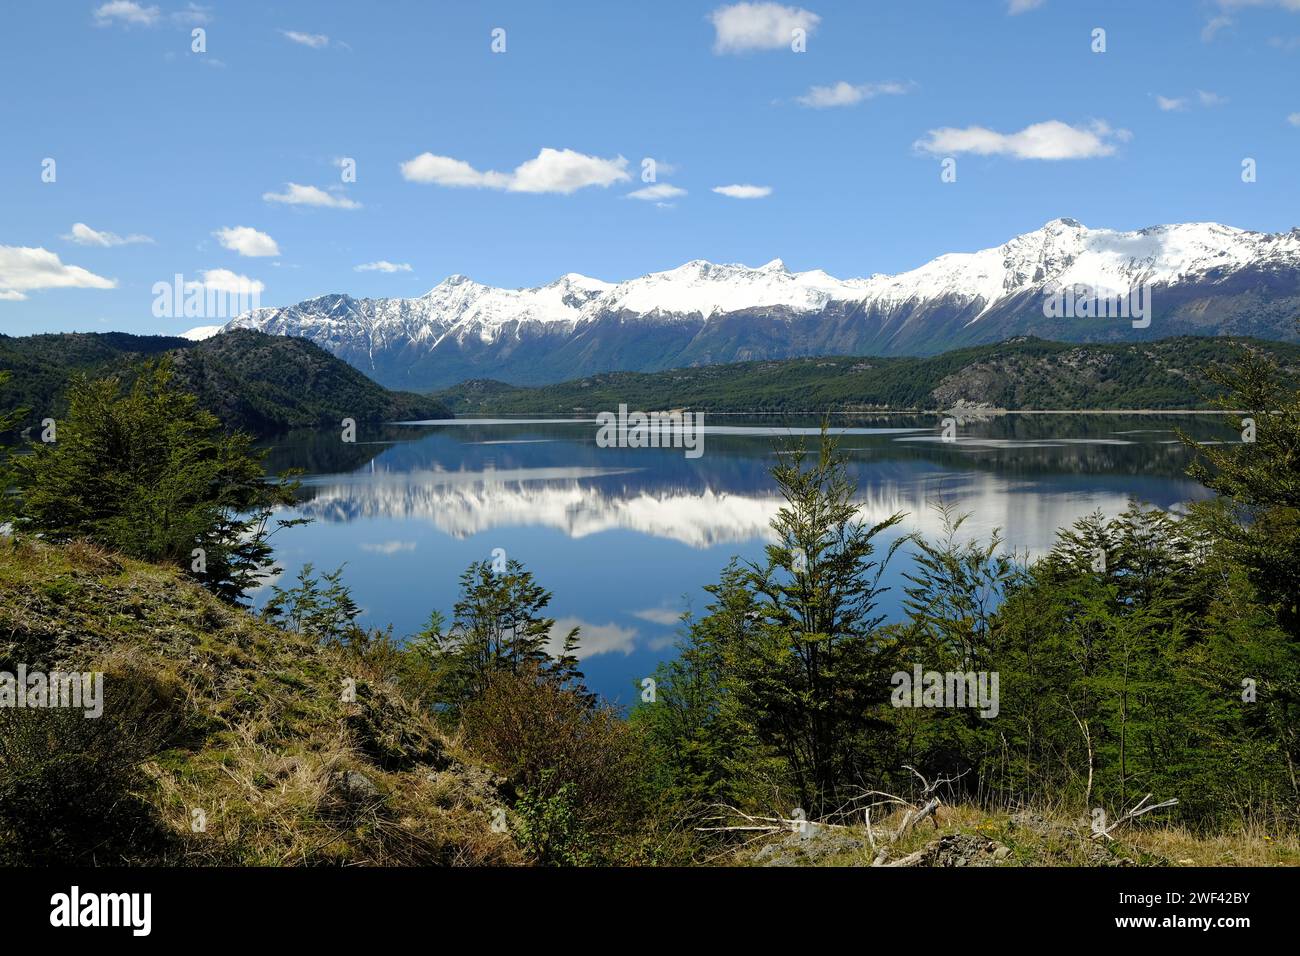 Snowy mountains of Patagonian Chile reflected in the still waters of Lago Cisnes near Villa O'Higgins on the Carretera Austral. Stock Photo